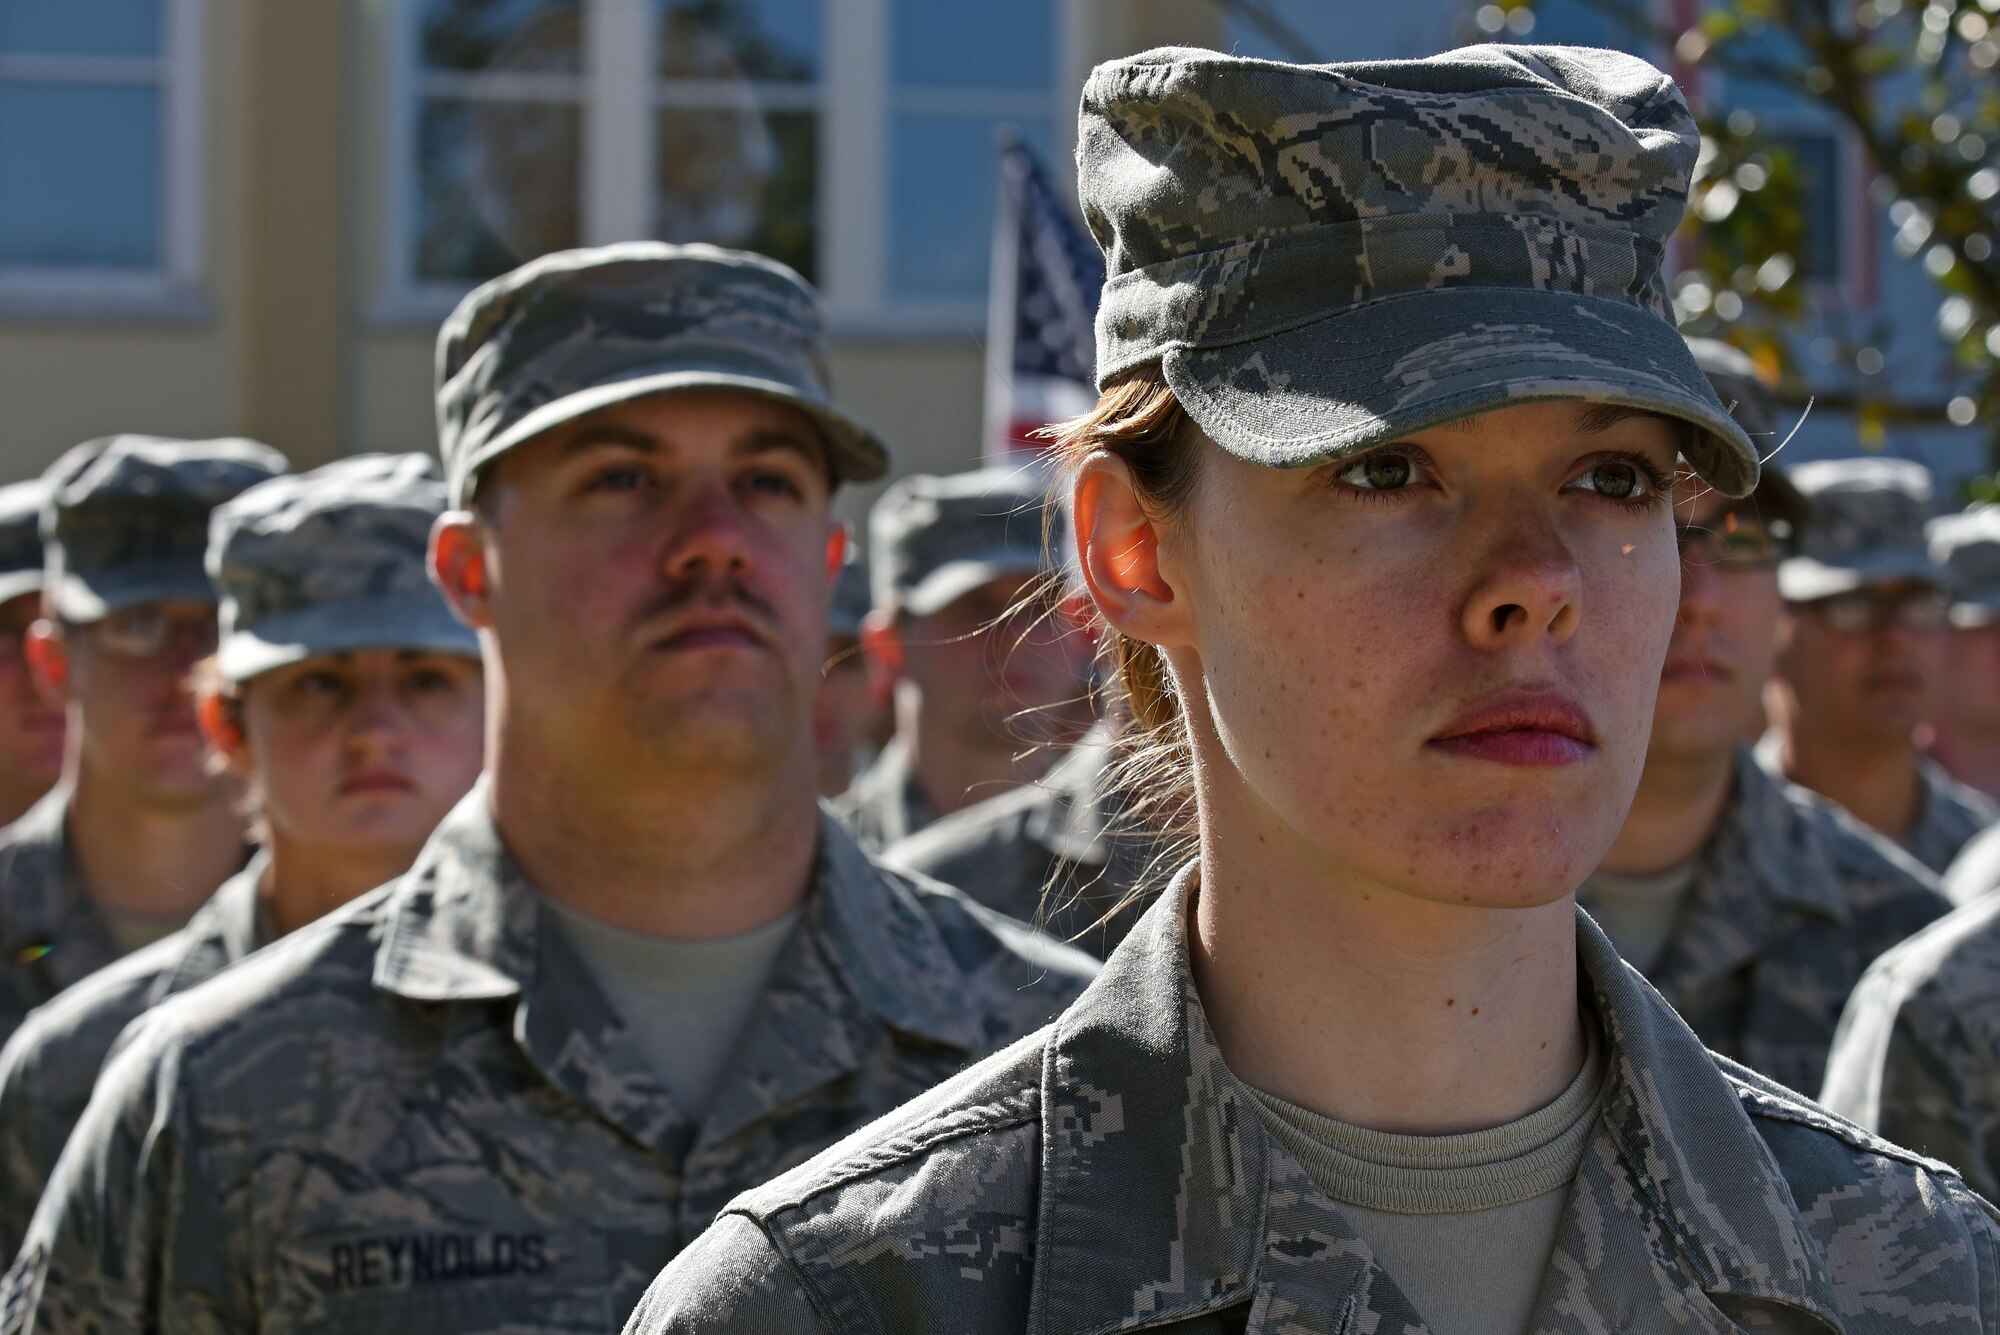 U.S. Airmen attending the 20th Force Support Squadron Senior Master Sgt. David B. Reid Airman Leadership School stand in formation during a Veterans Day Celebration ceremony in Sumter, South Carolina, Nov. 11, 2017.